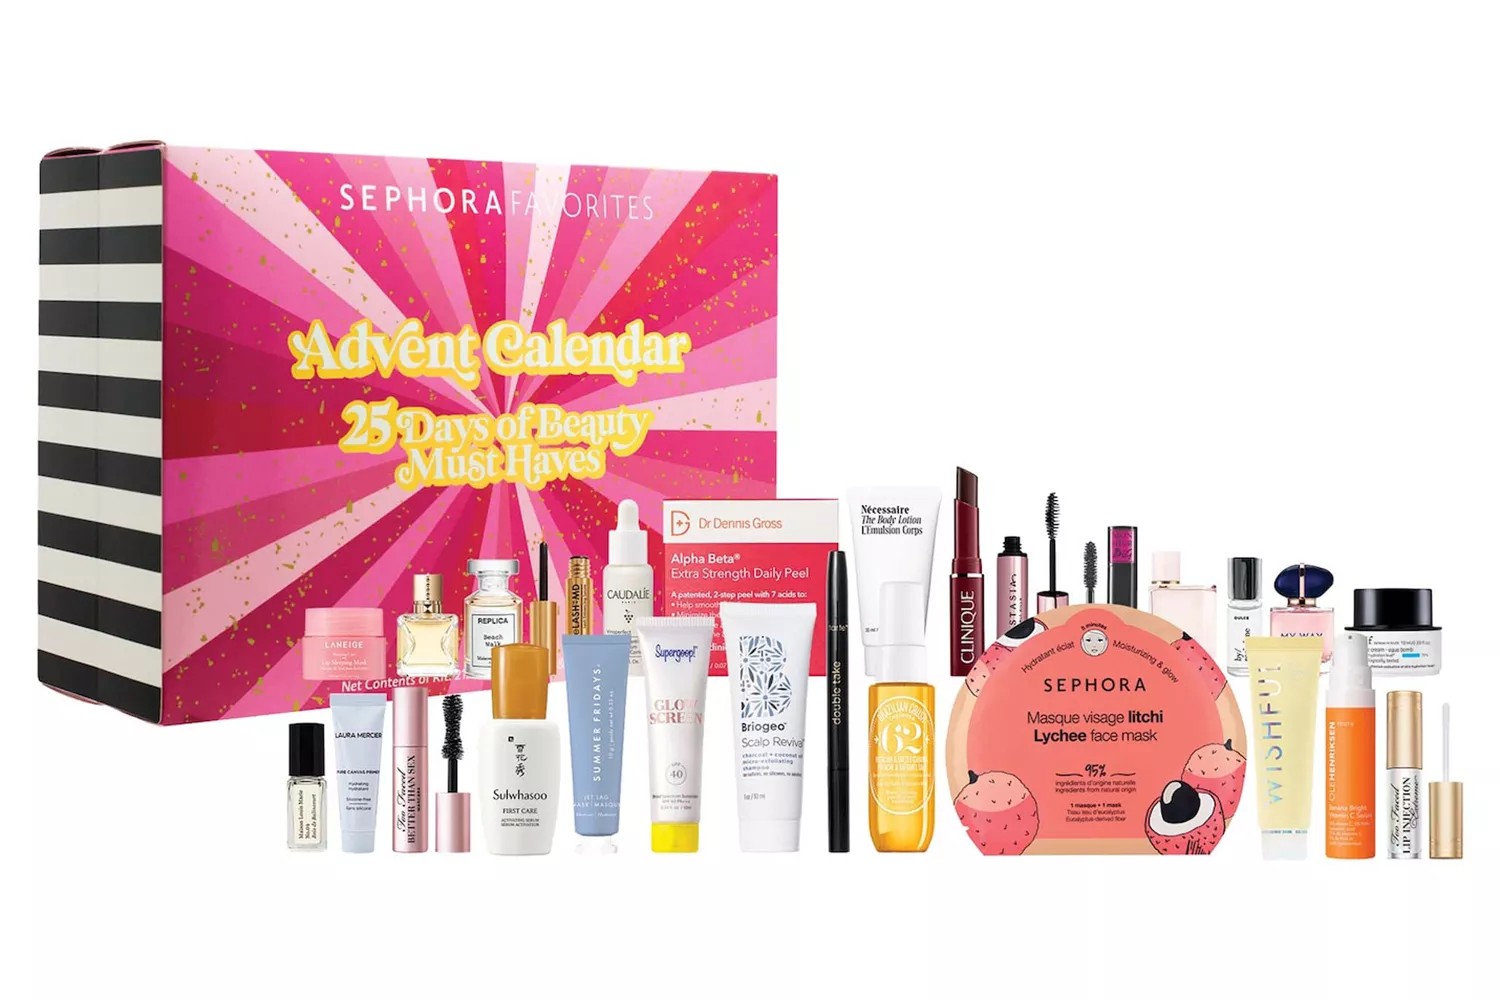 Sephora Favorites Advent Calendar 25 Days of Beauty Must-Haves